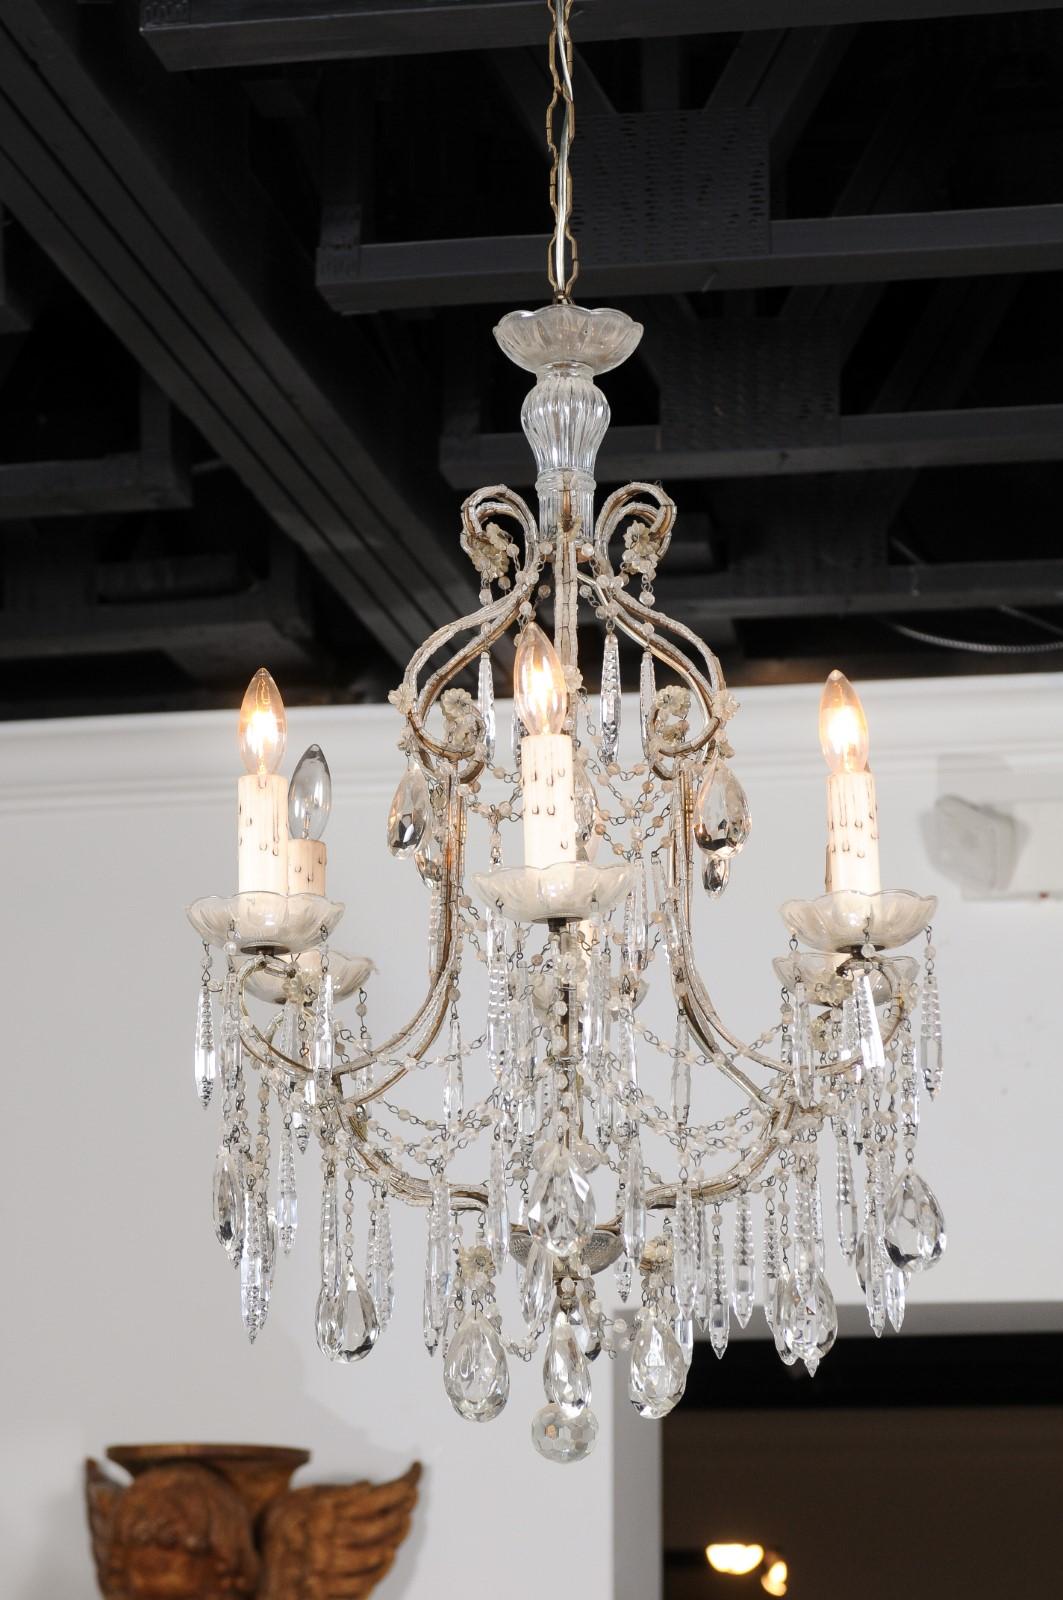 Italian 19th Century Six-Light Chandelier with Beaded Arms and Spear Crystals For Sale 12